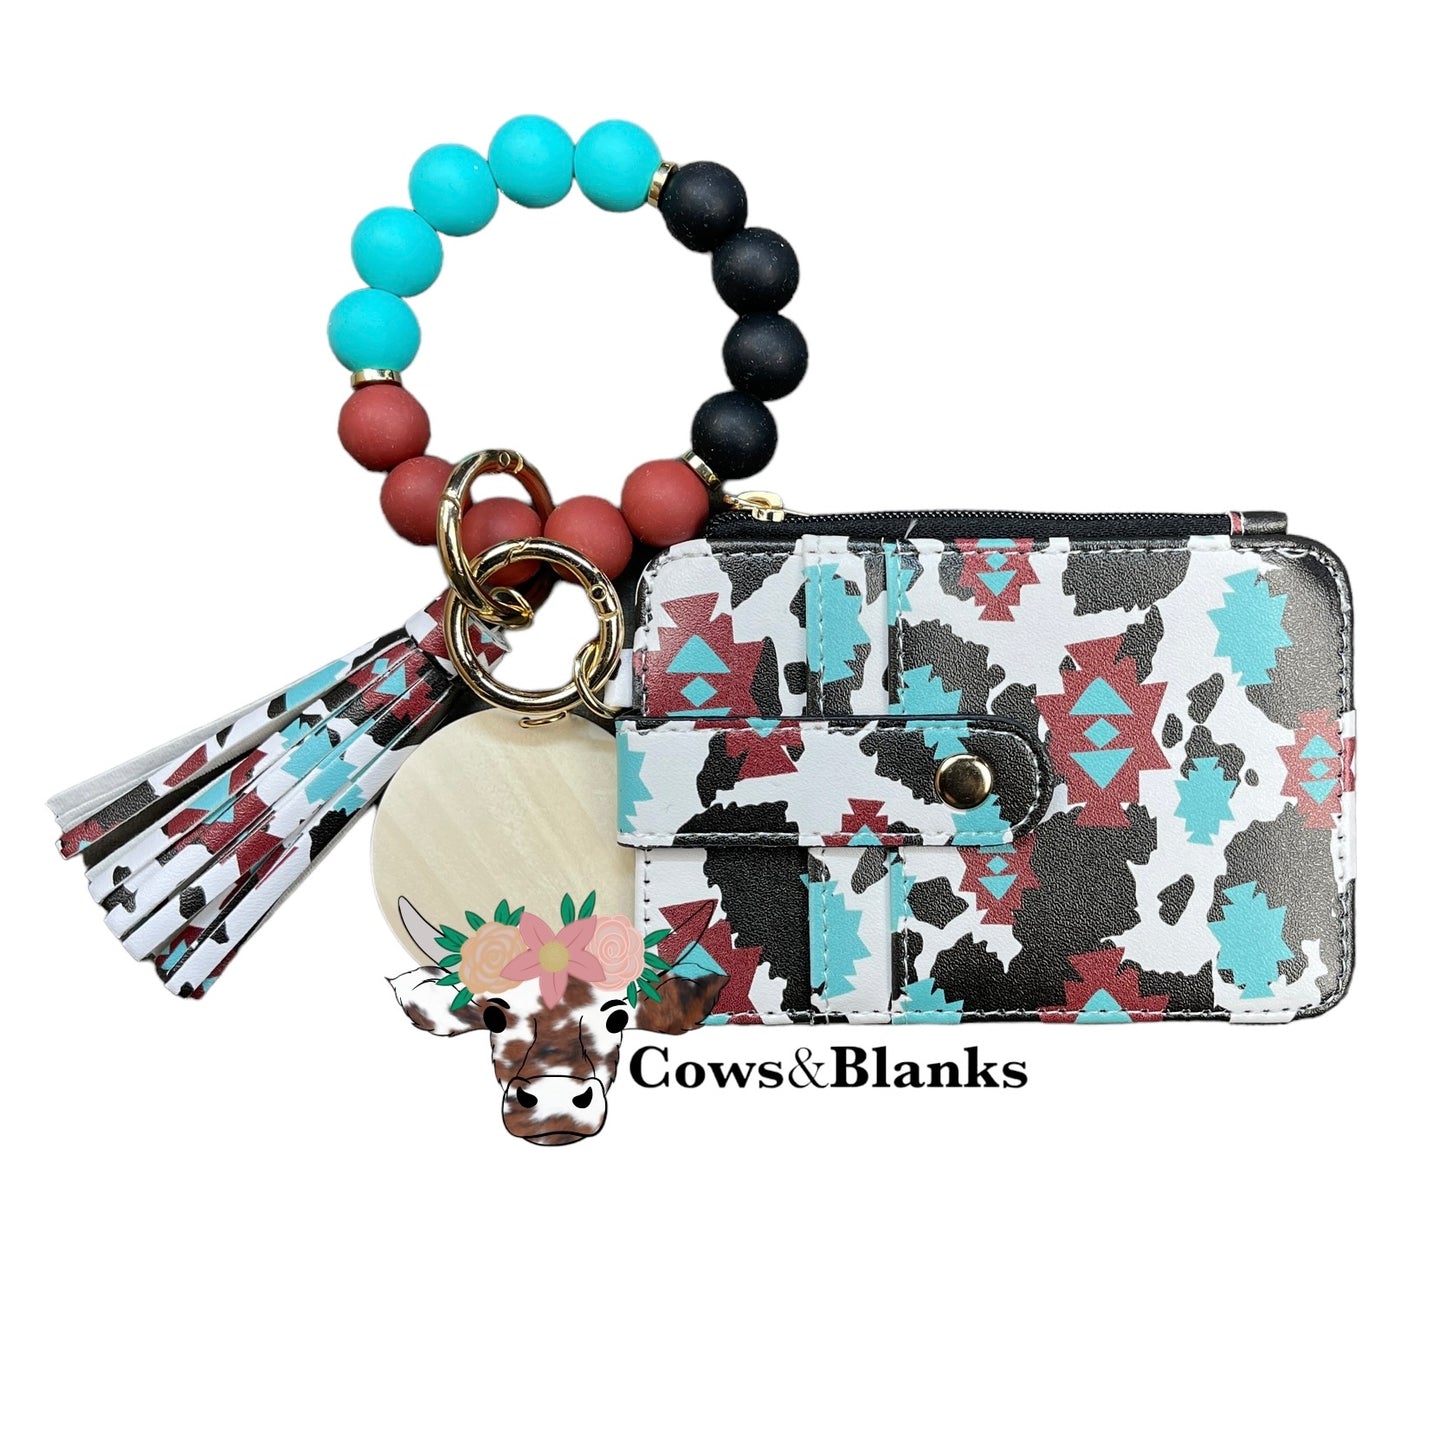 Wallet/Wristlet with Black, Rust, White and Turquoise Aztec Style Cardholder with a Black, Rust, and Turquoise Silicone Beaded Wristlet with a Wooden Accent Bead, Gold Hardware, Matching Tassel, and a Wooden Disc